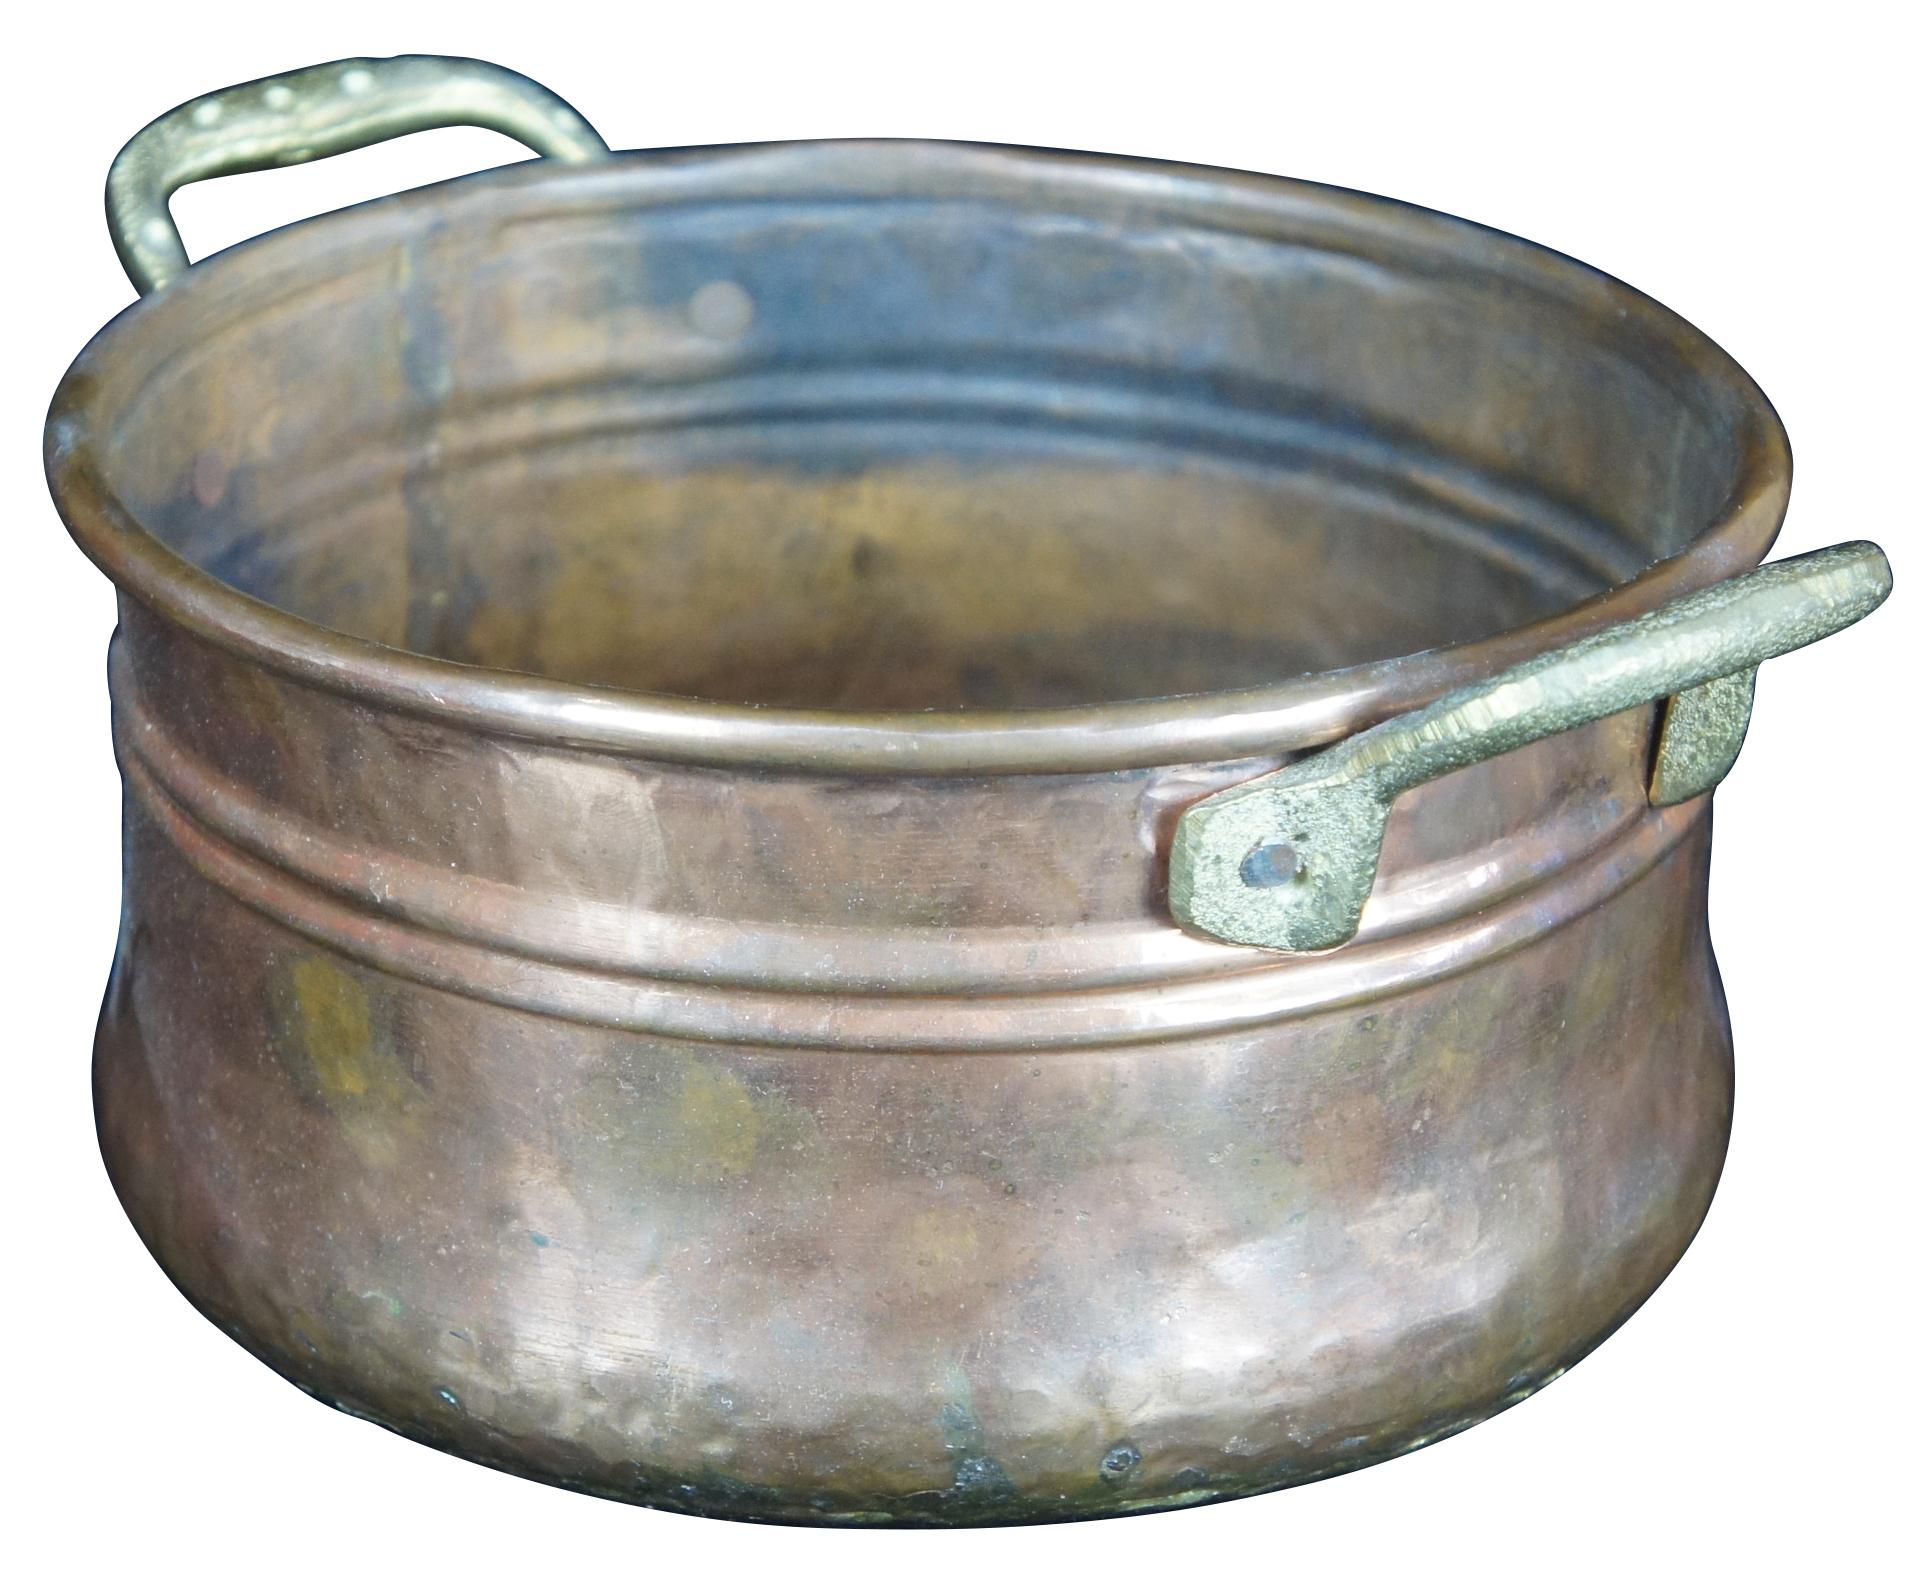 Antique cauldron, boiler or stock pot. Made of hammered copper featuring intricate dovetailing with brass handles and double banding accent. Measure: 9